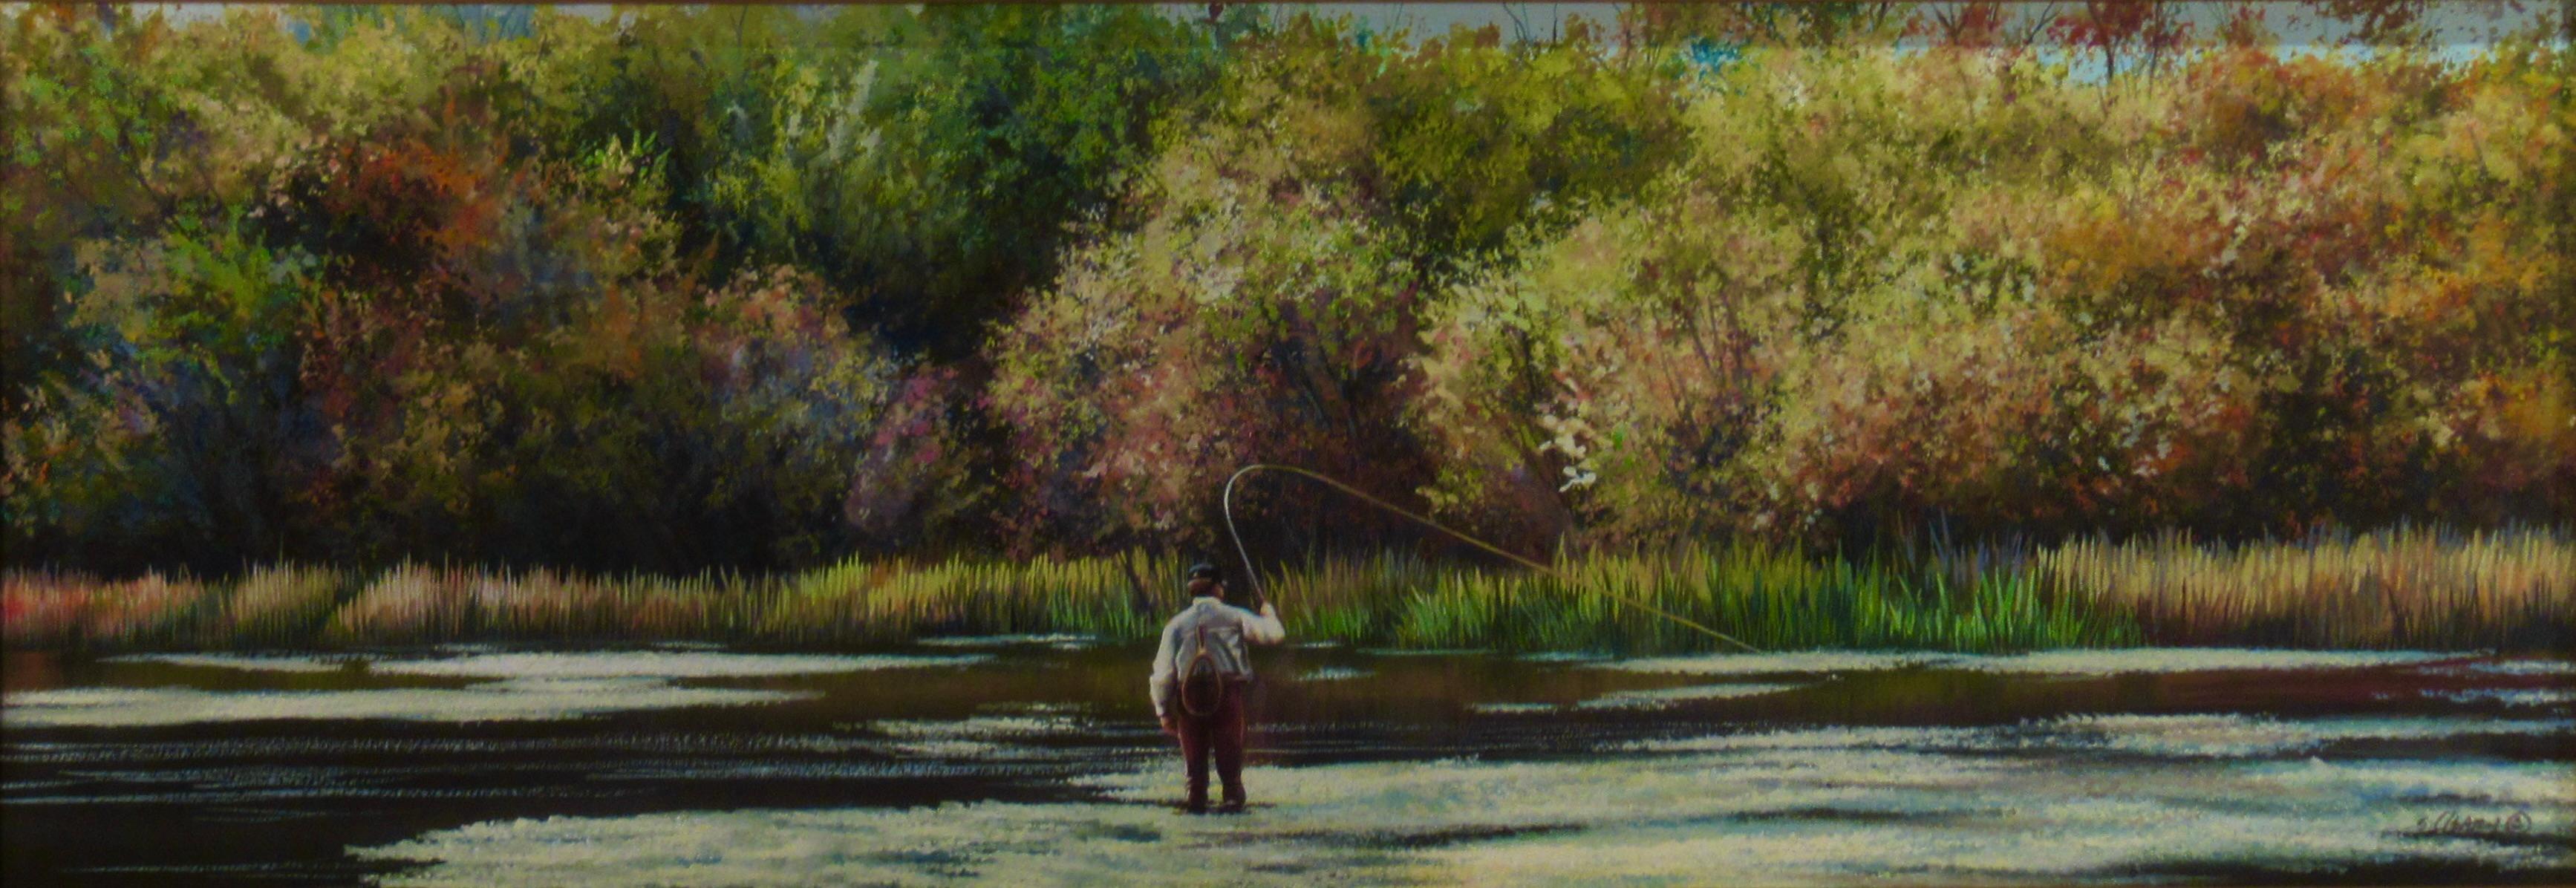 Fishing in a Lake - Art by Shirley Cleary